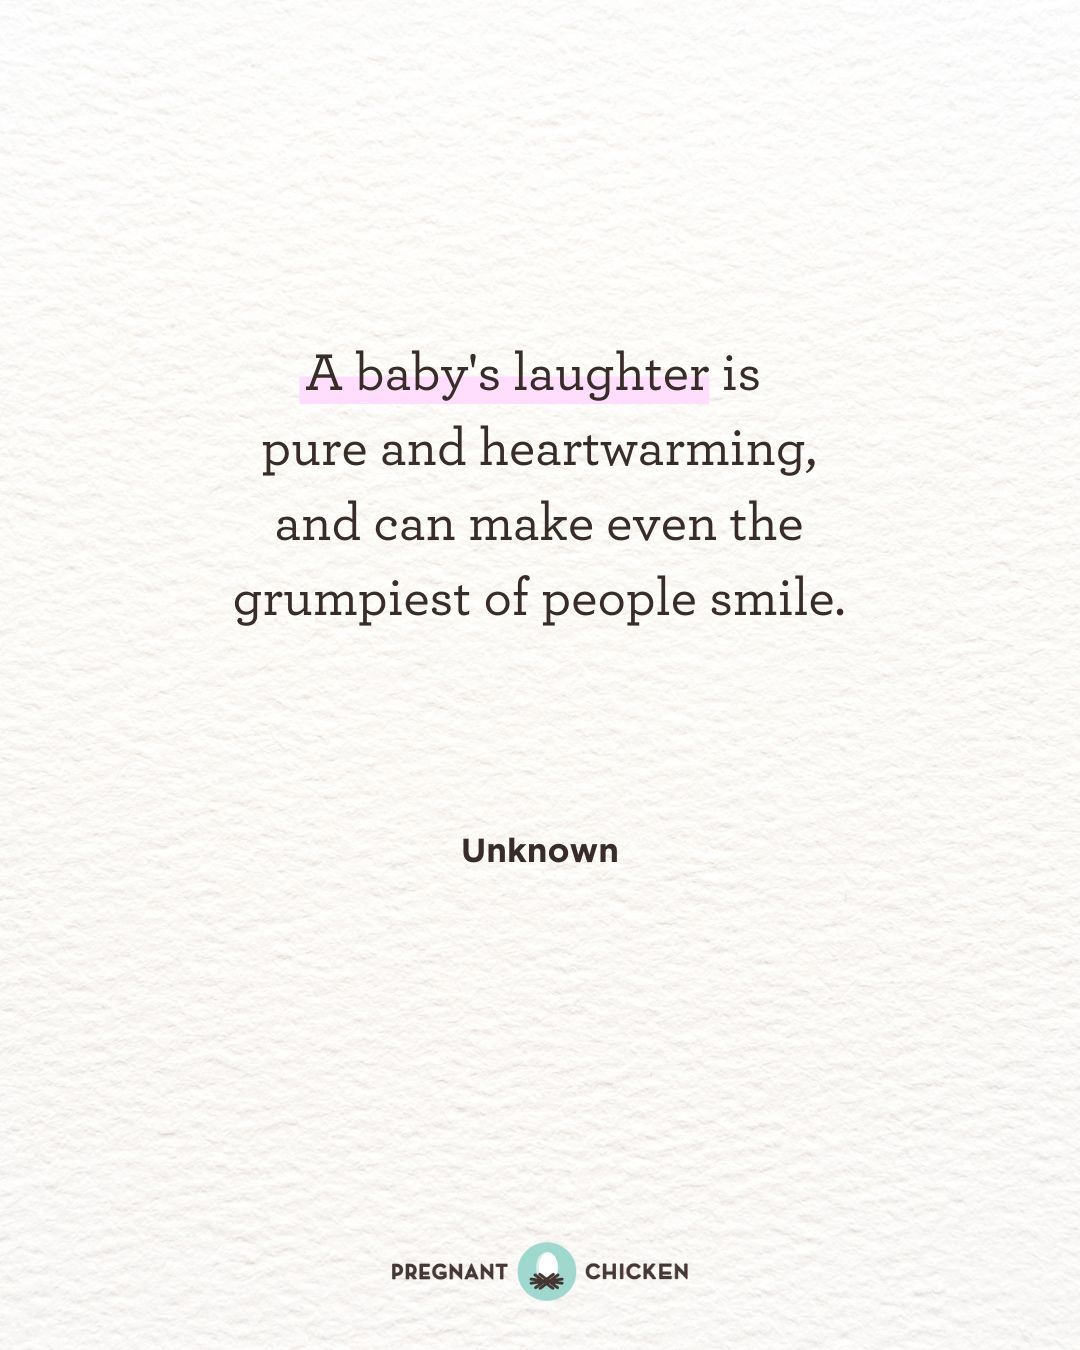 A baby's laughter is  pure and heartwarming, and can make even the grumpiest of people smile.